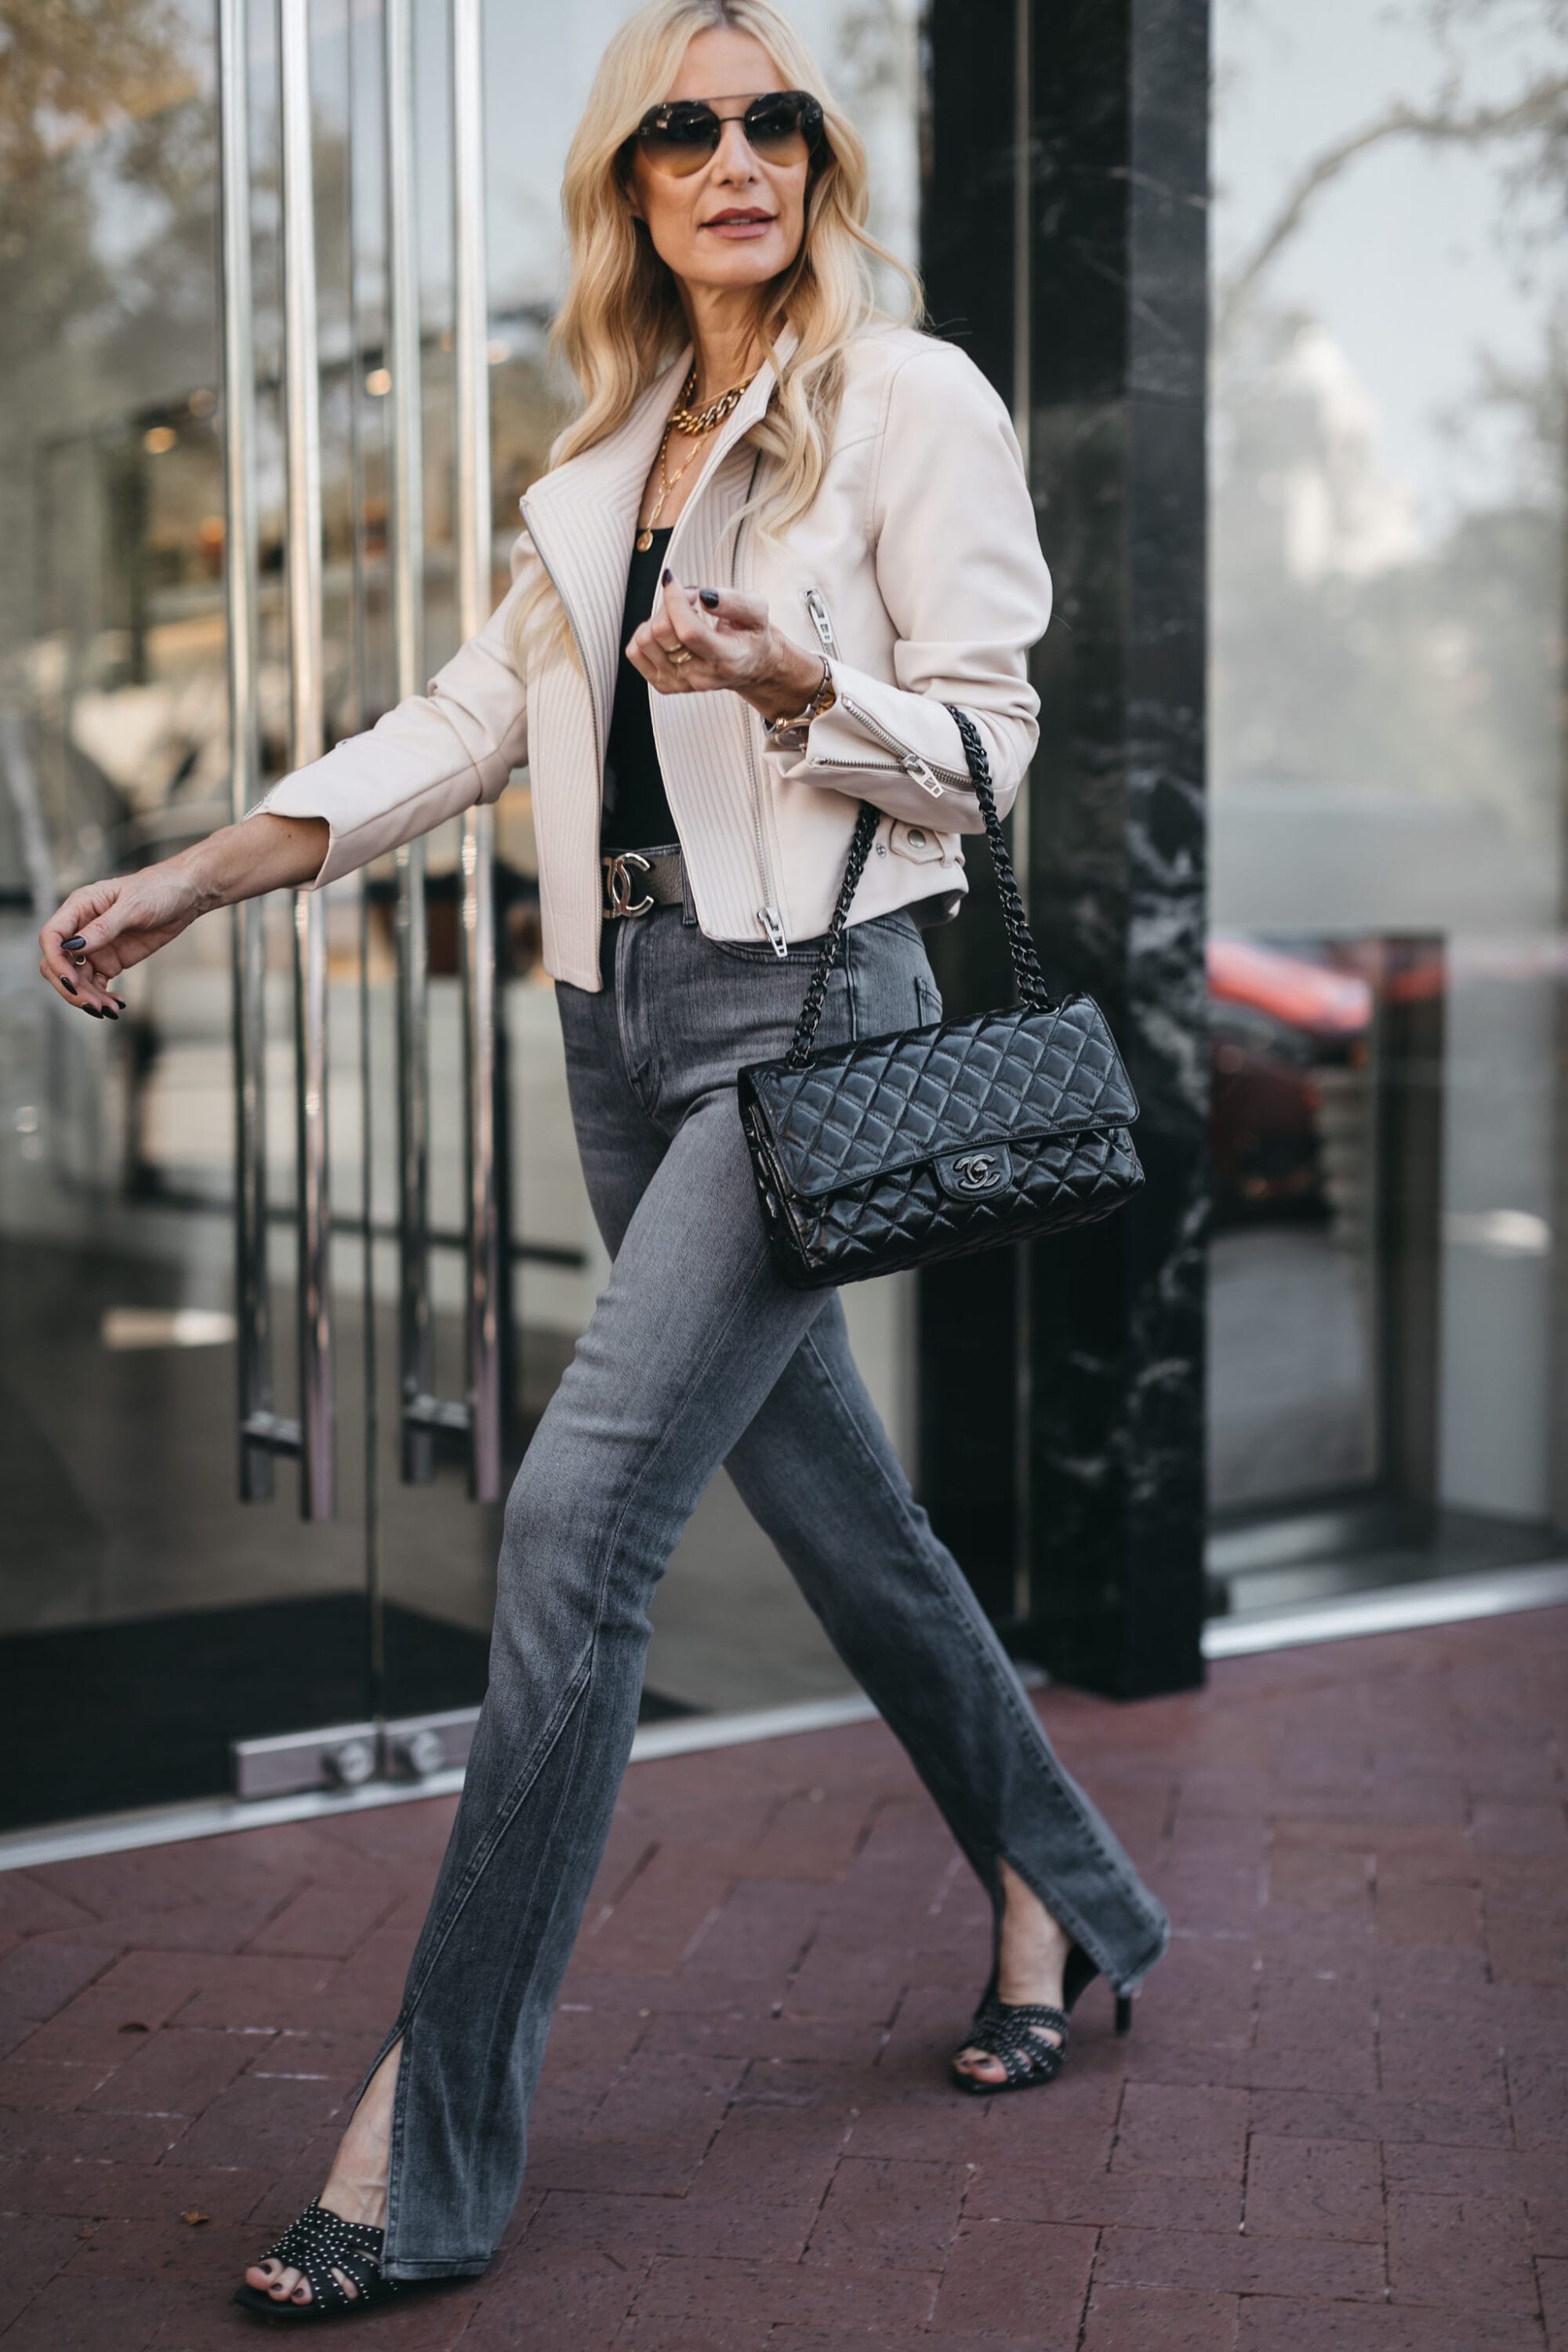 Woman Over 40 wearing on of October's best sellers - split-hem jeans with a black bodysuit and faux leather jacket.